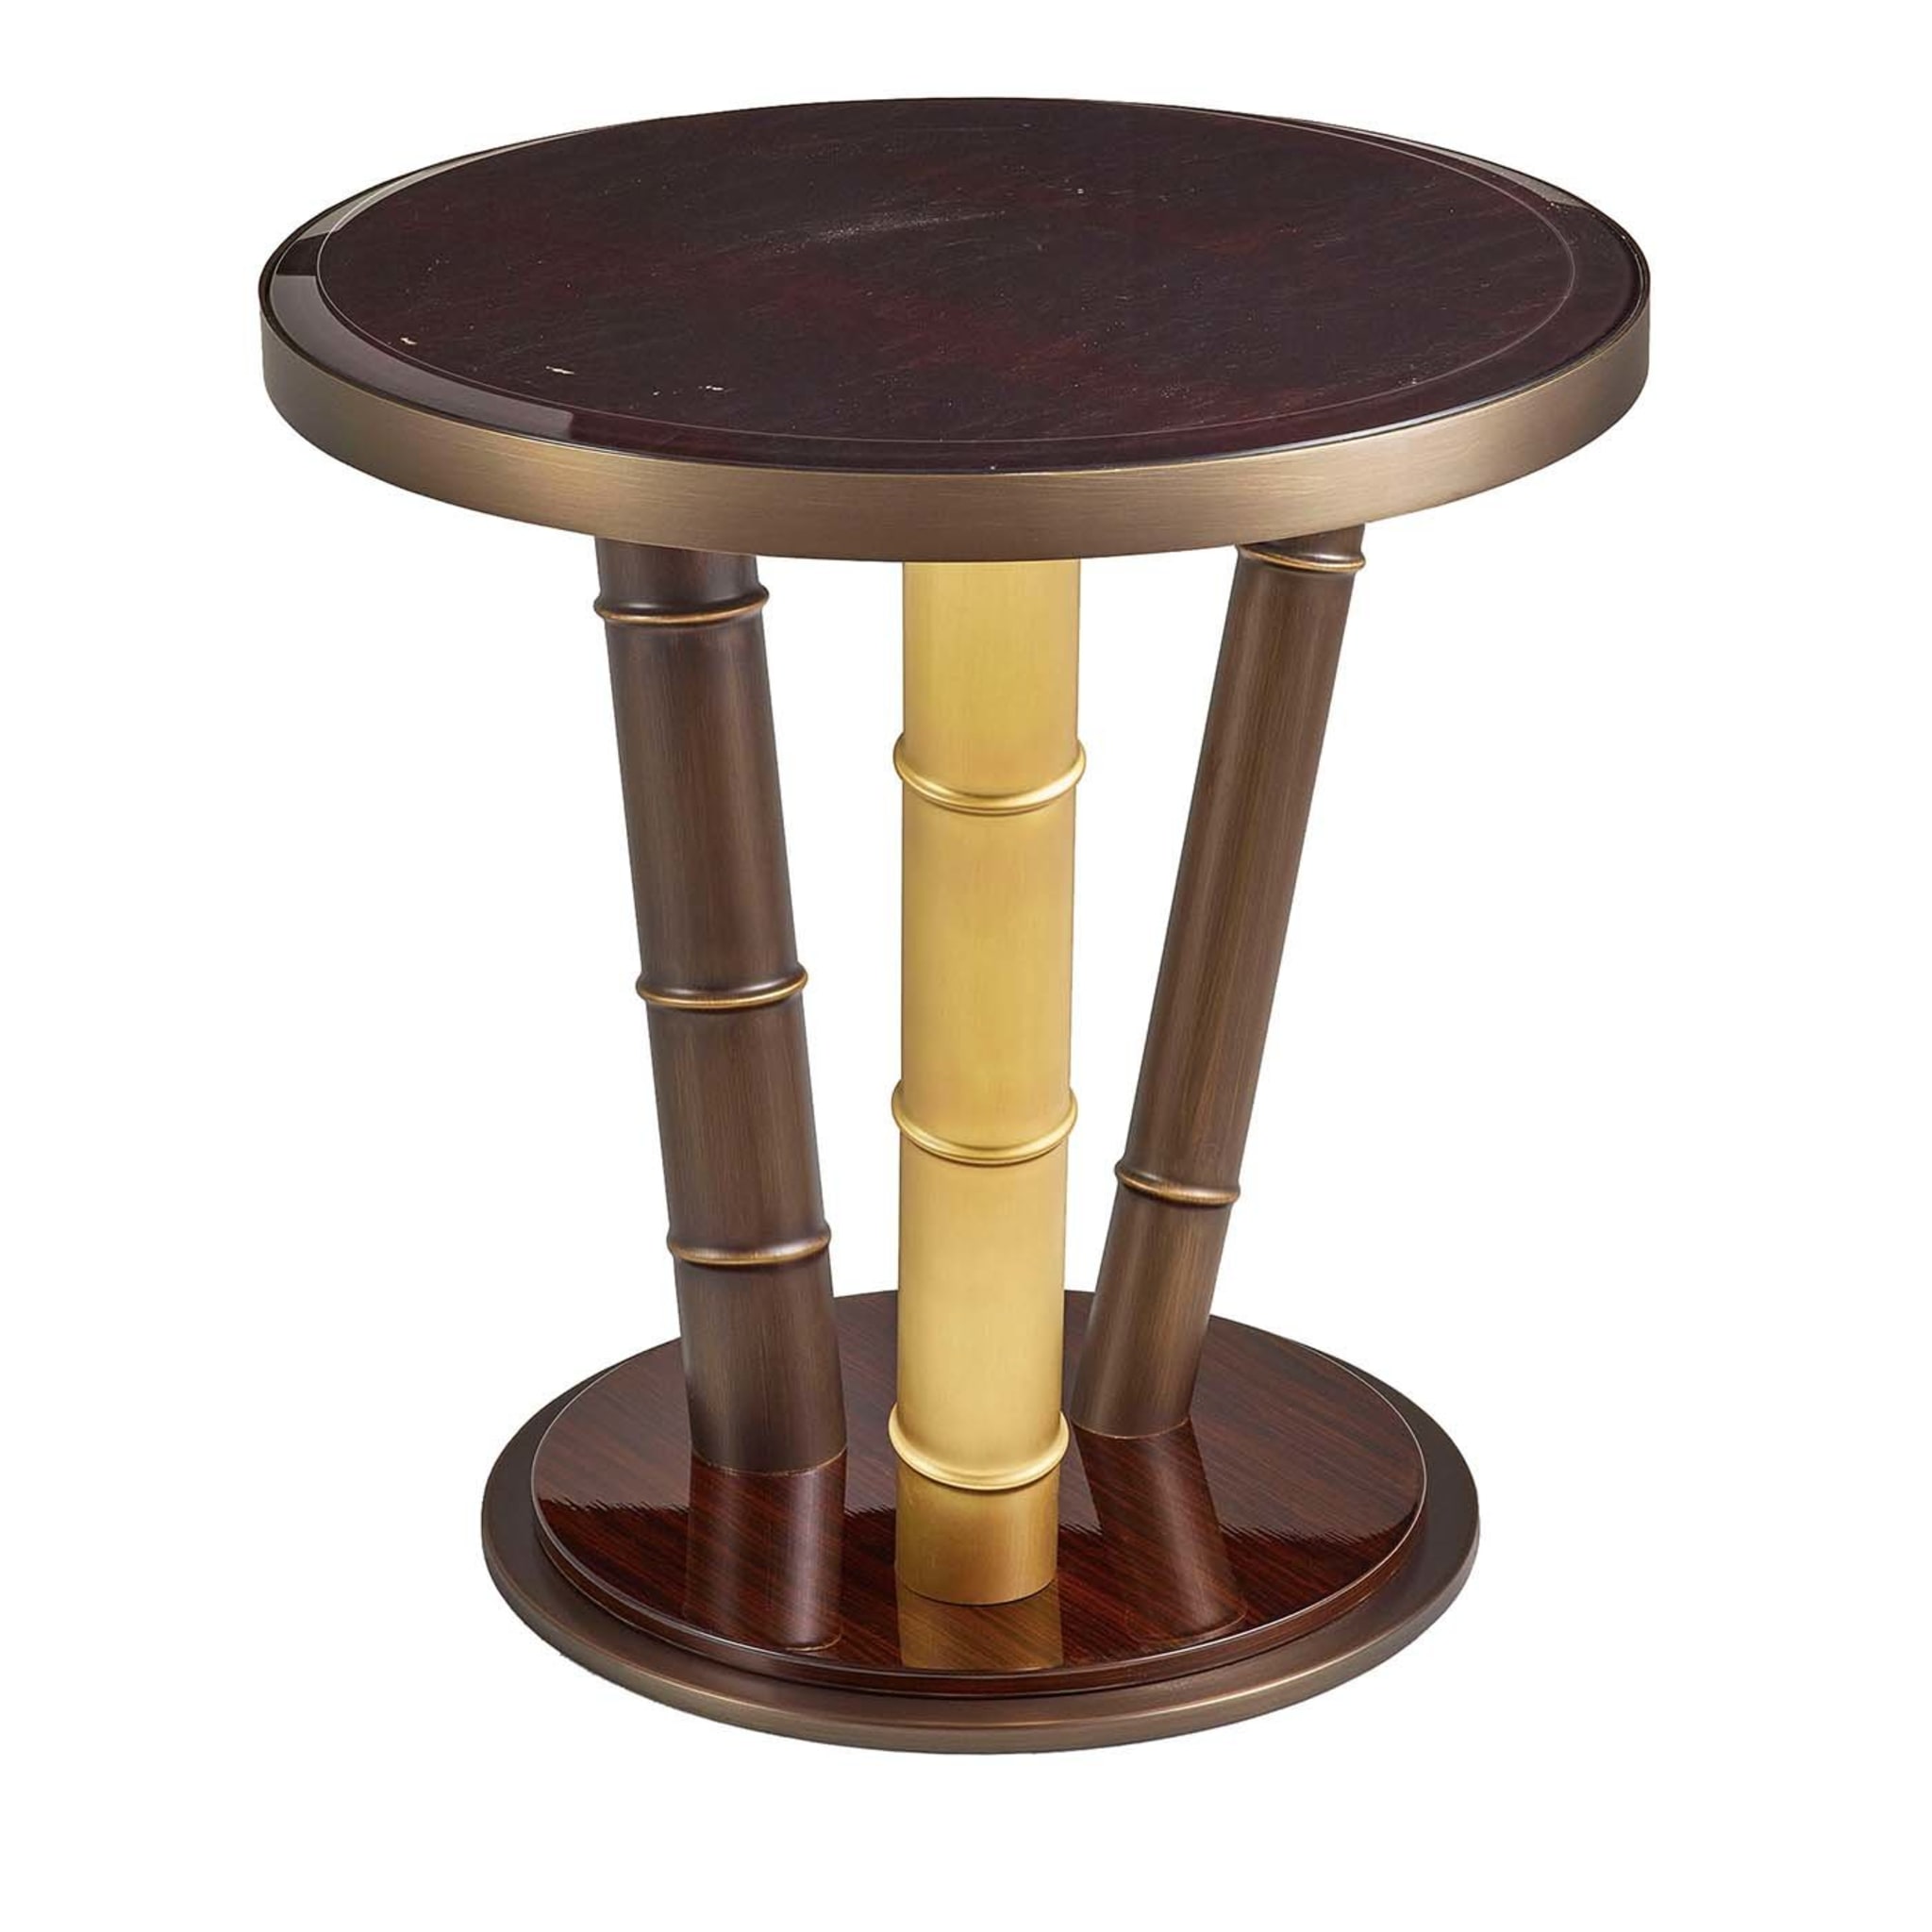 Siam side table - Main view